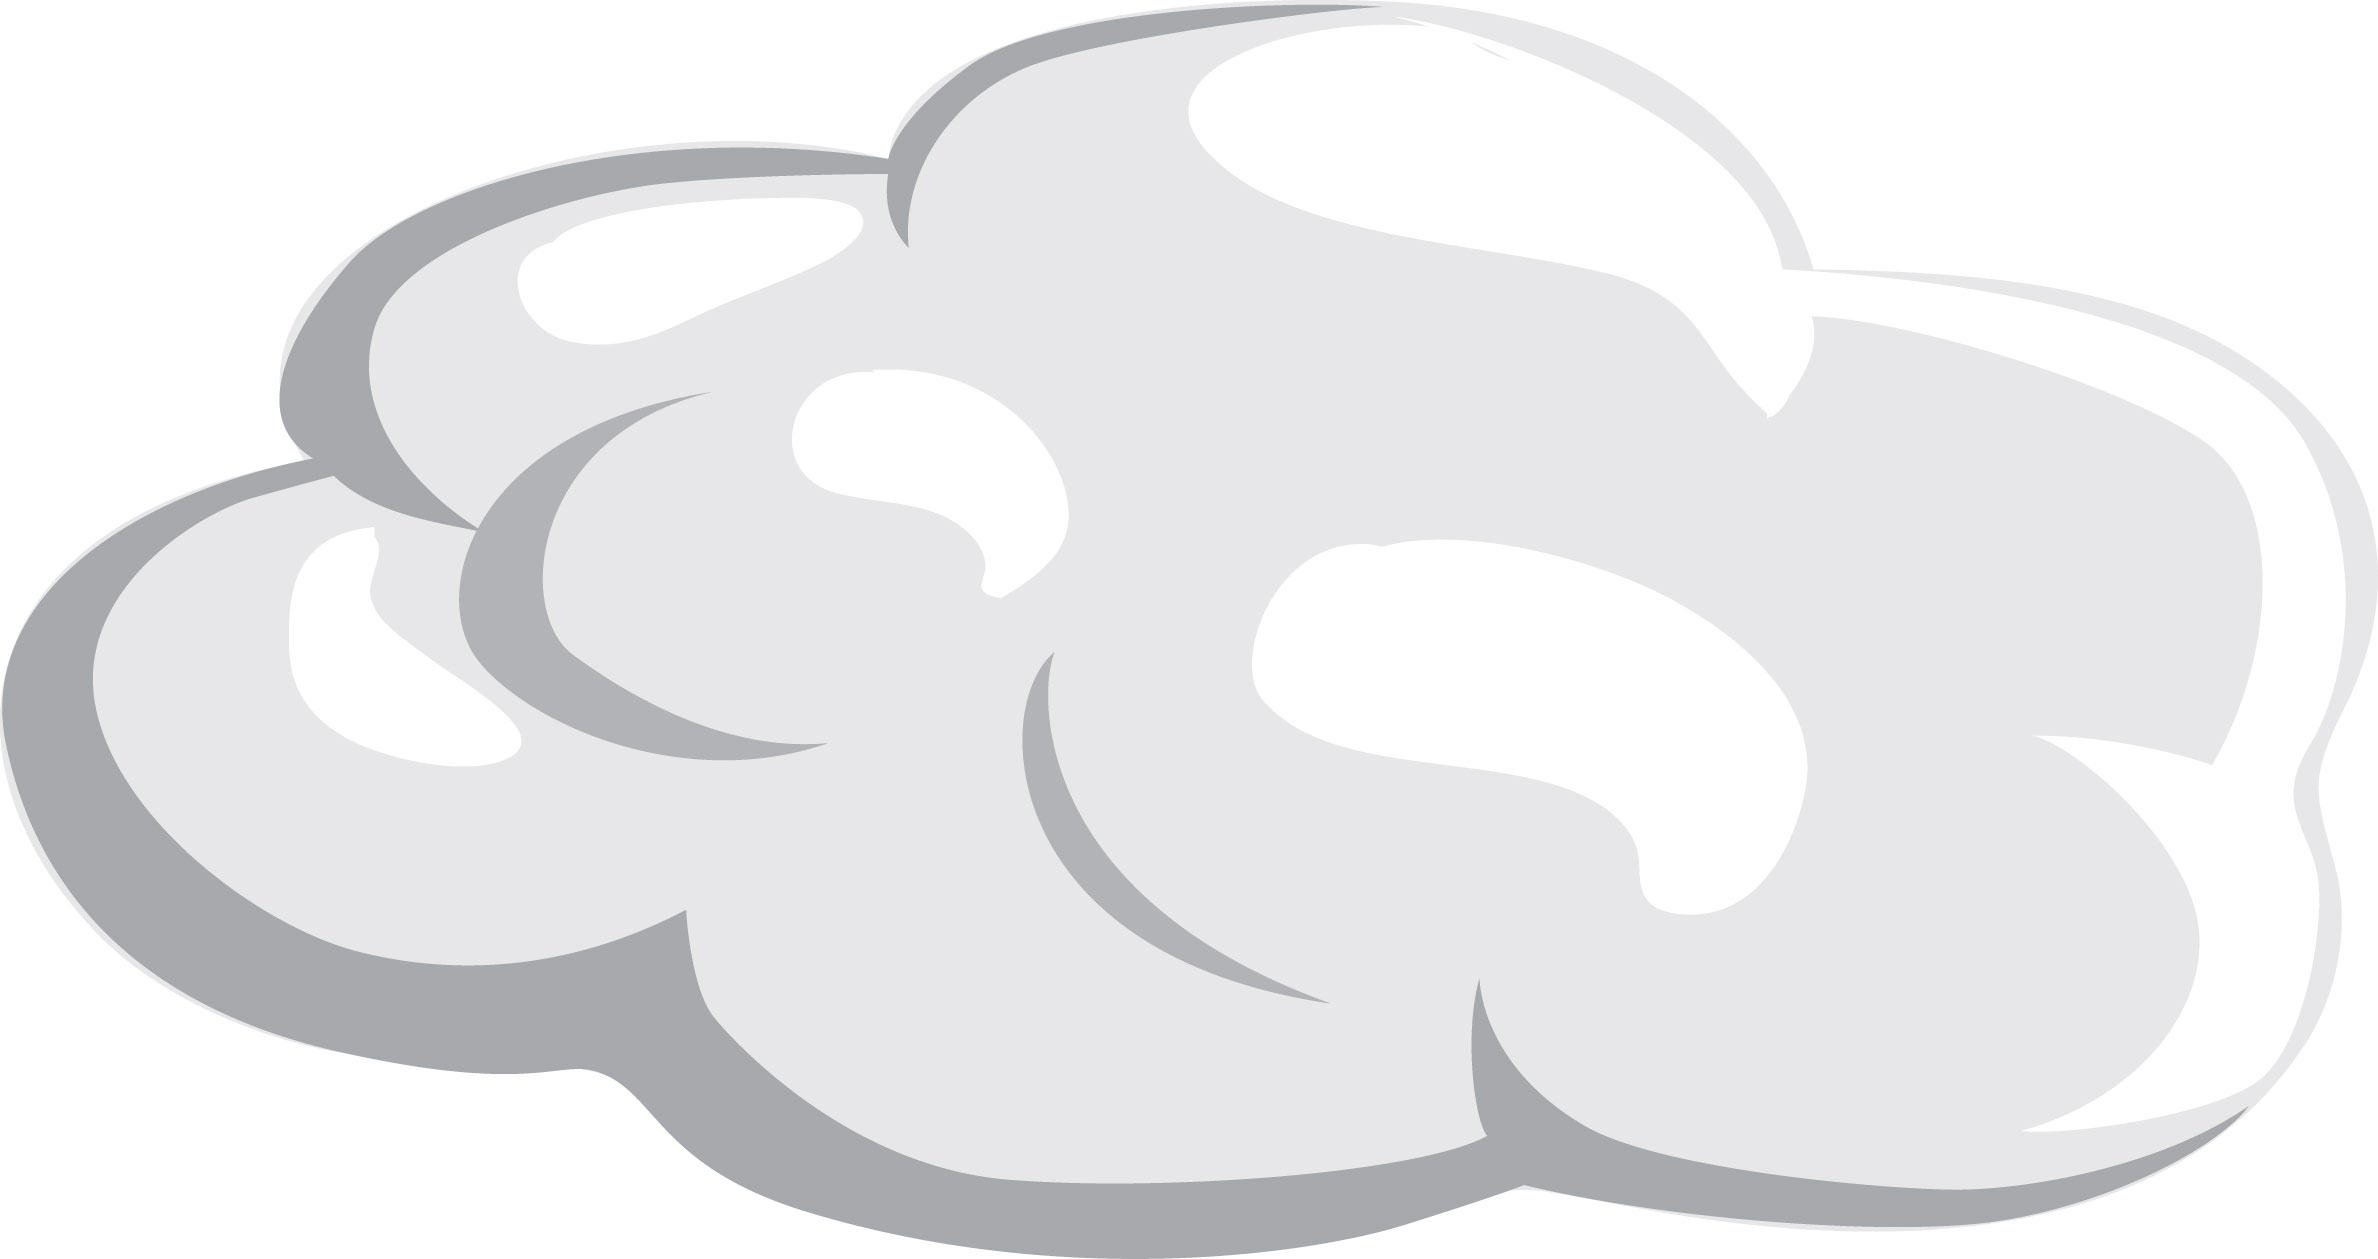 Smooth cloud clipart